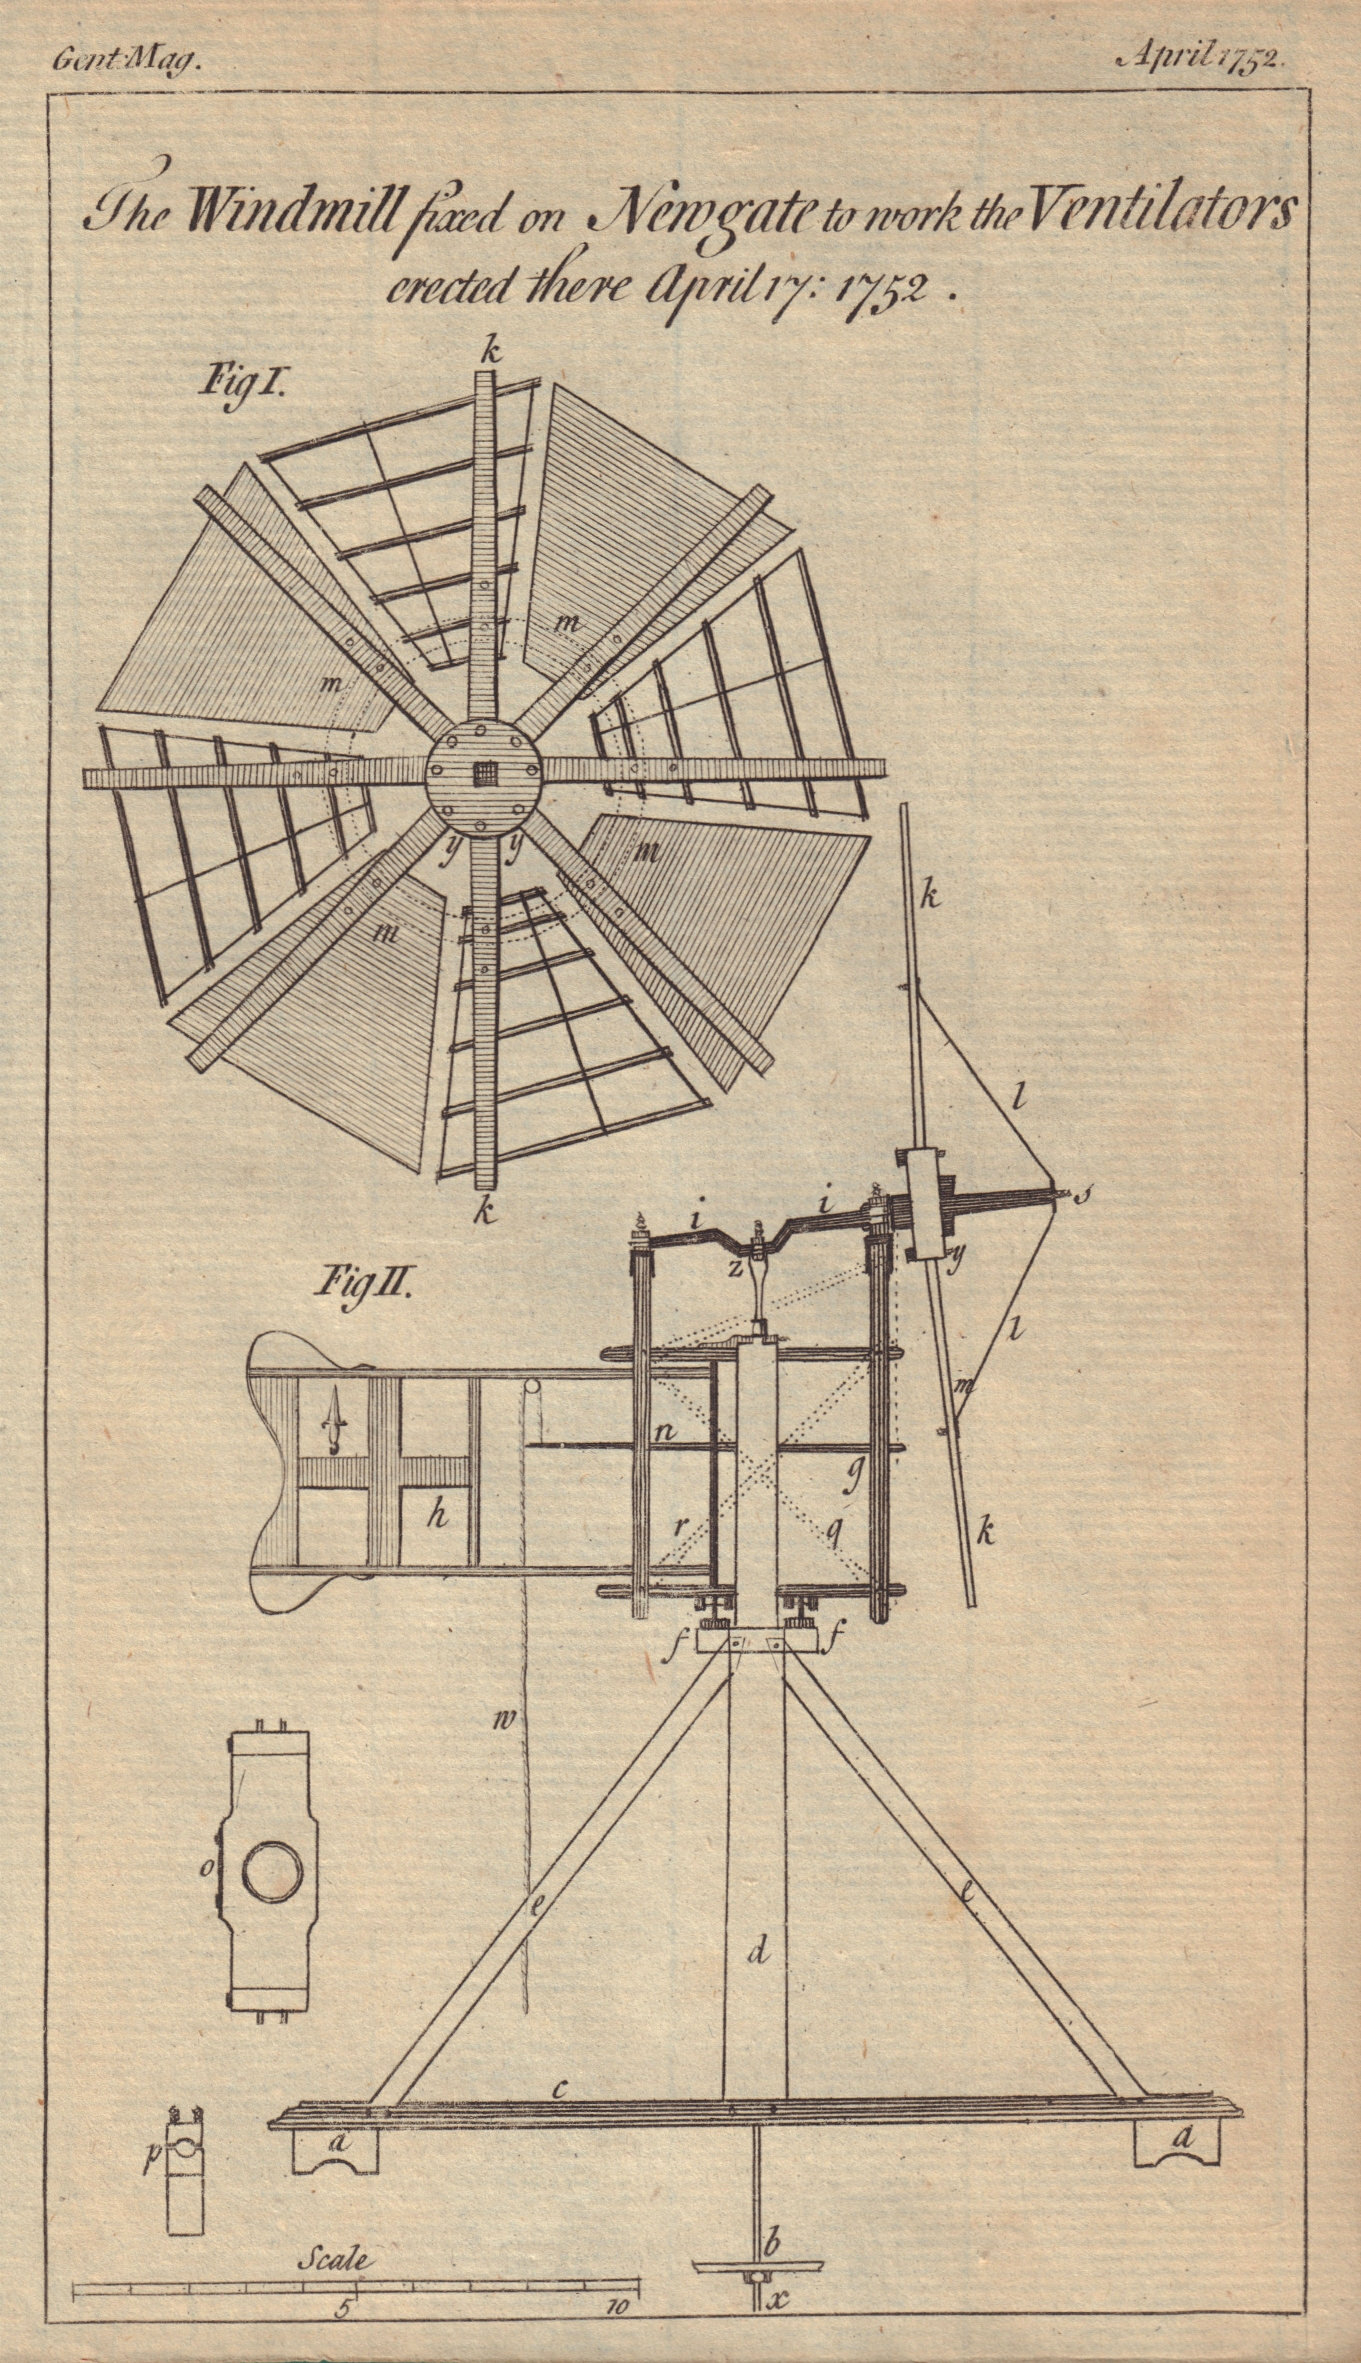 The Windmill fixed on Newgate [jail] to work the Ventilators erected 1752